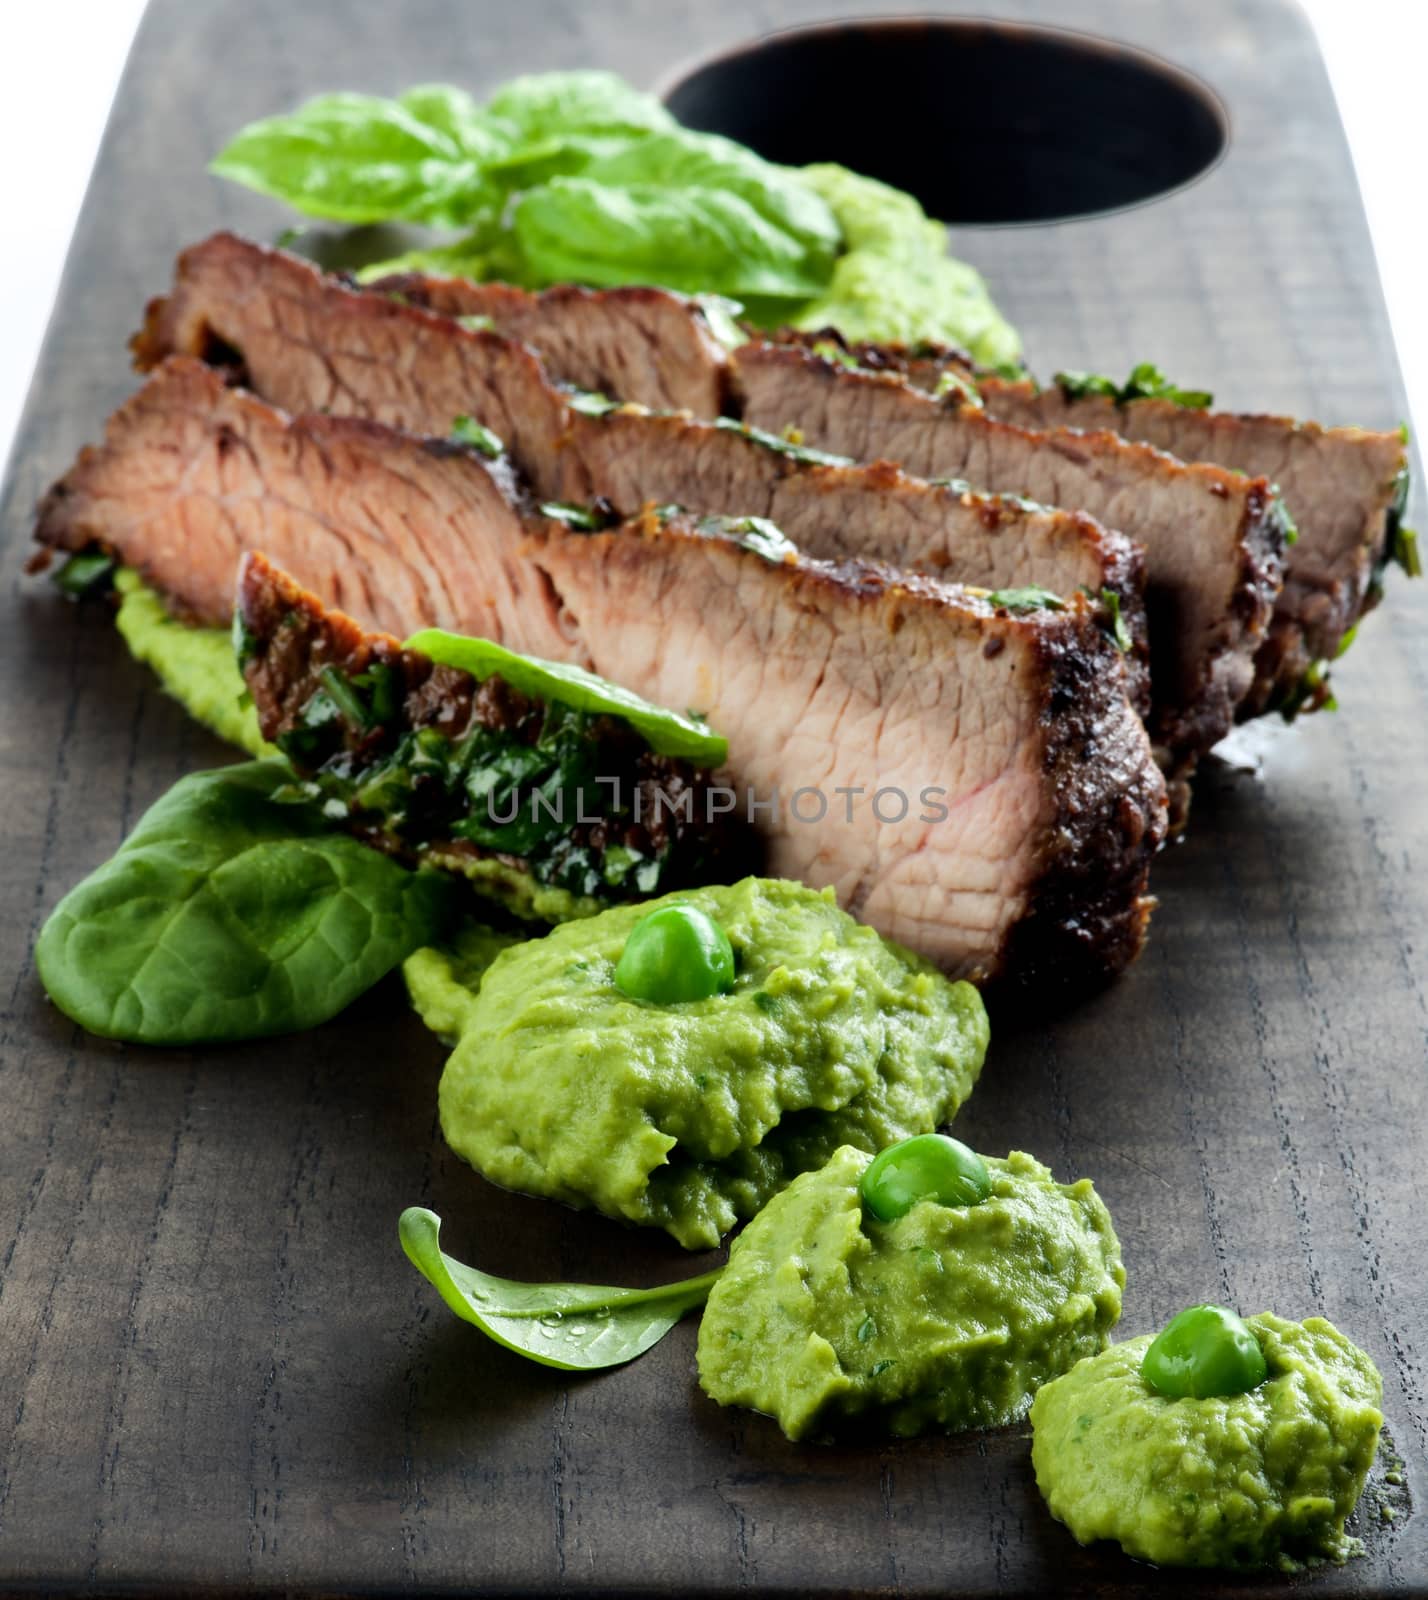 Delicious Roasted in Herbs Pork and Mashed Green Pea Puree on Wooden Serving Board closeup. Focus on Foreground